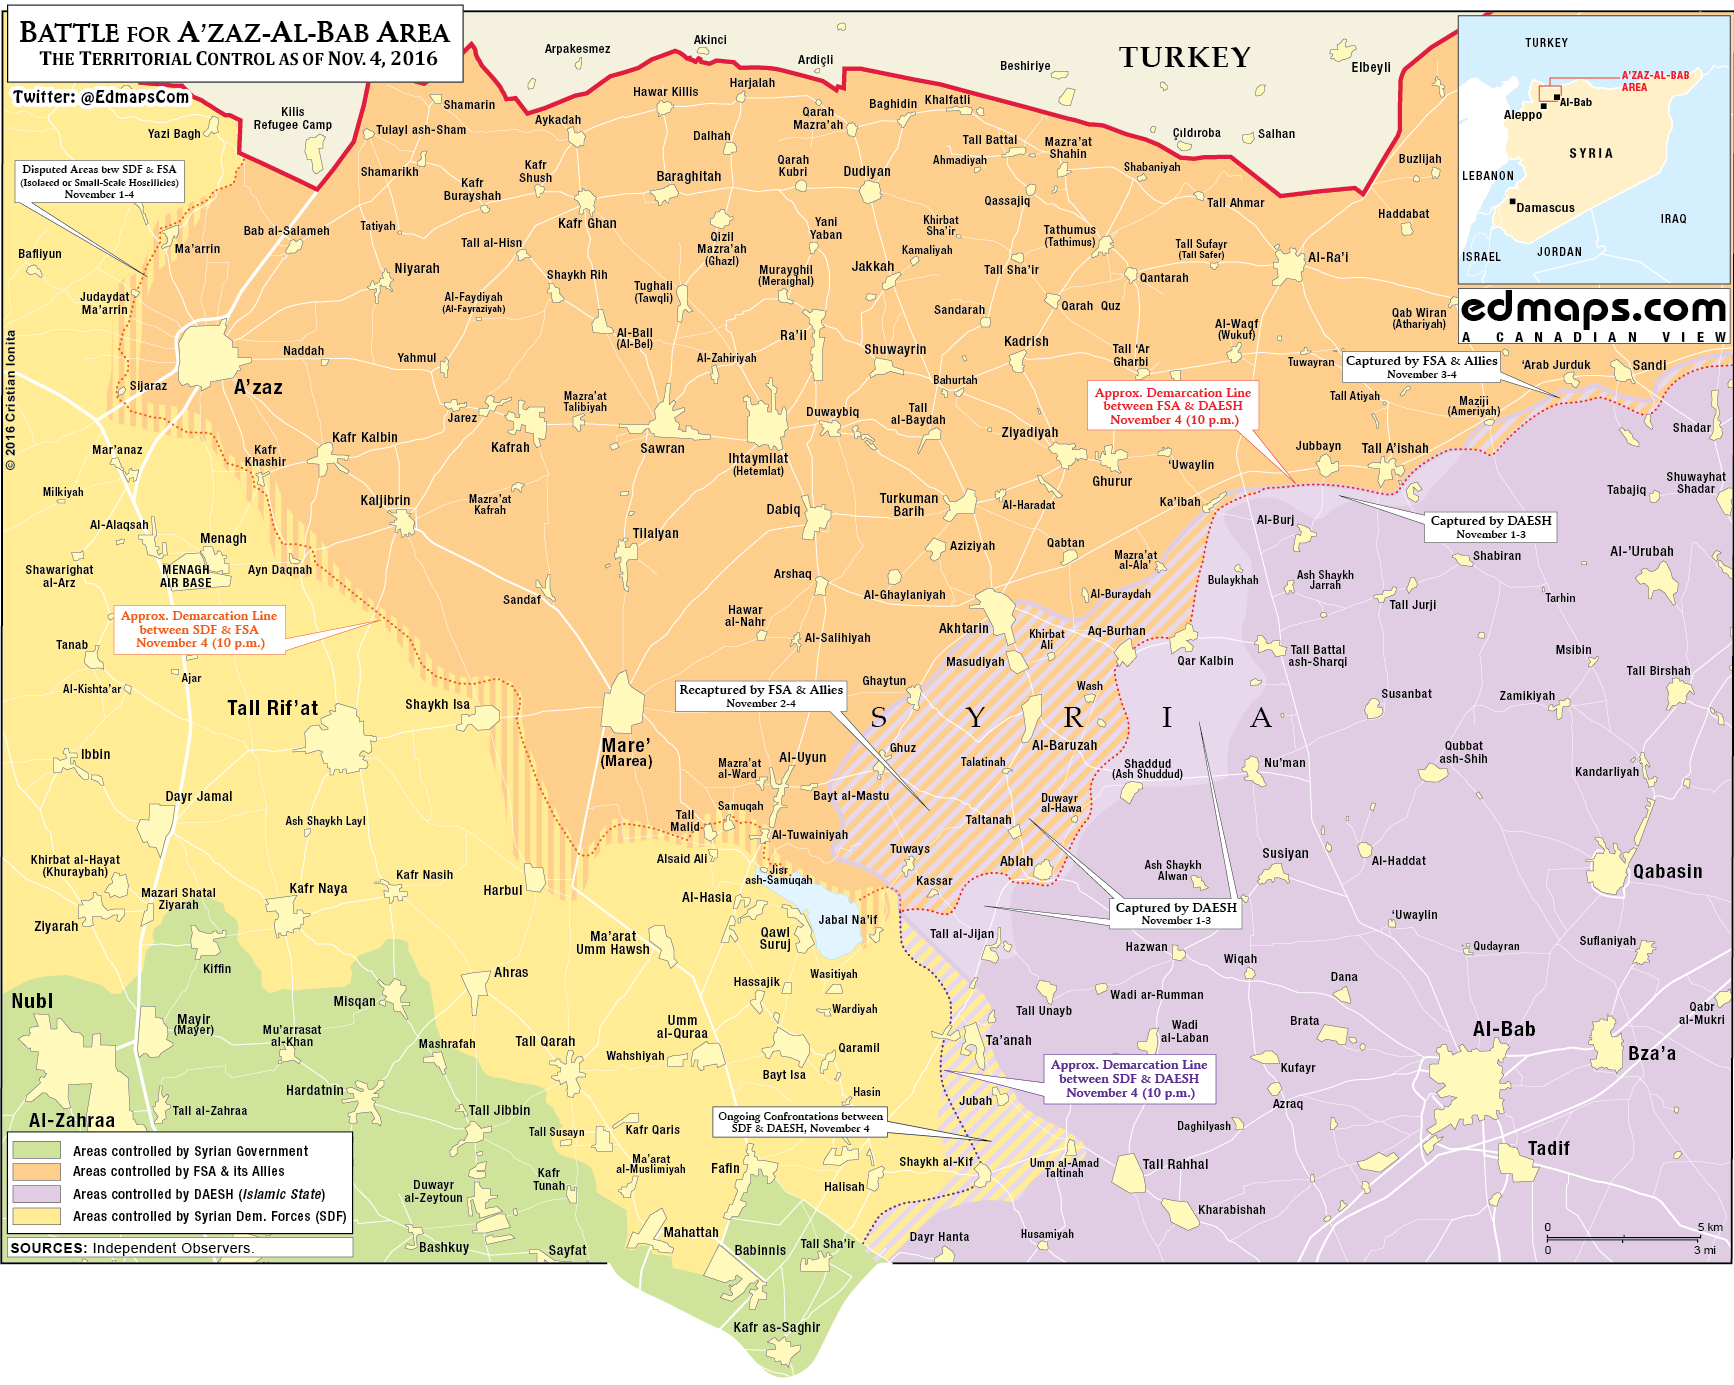 Syria War Map: Military Situation in Northeast of Aleppo City on November 4